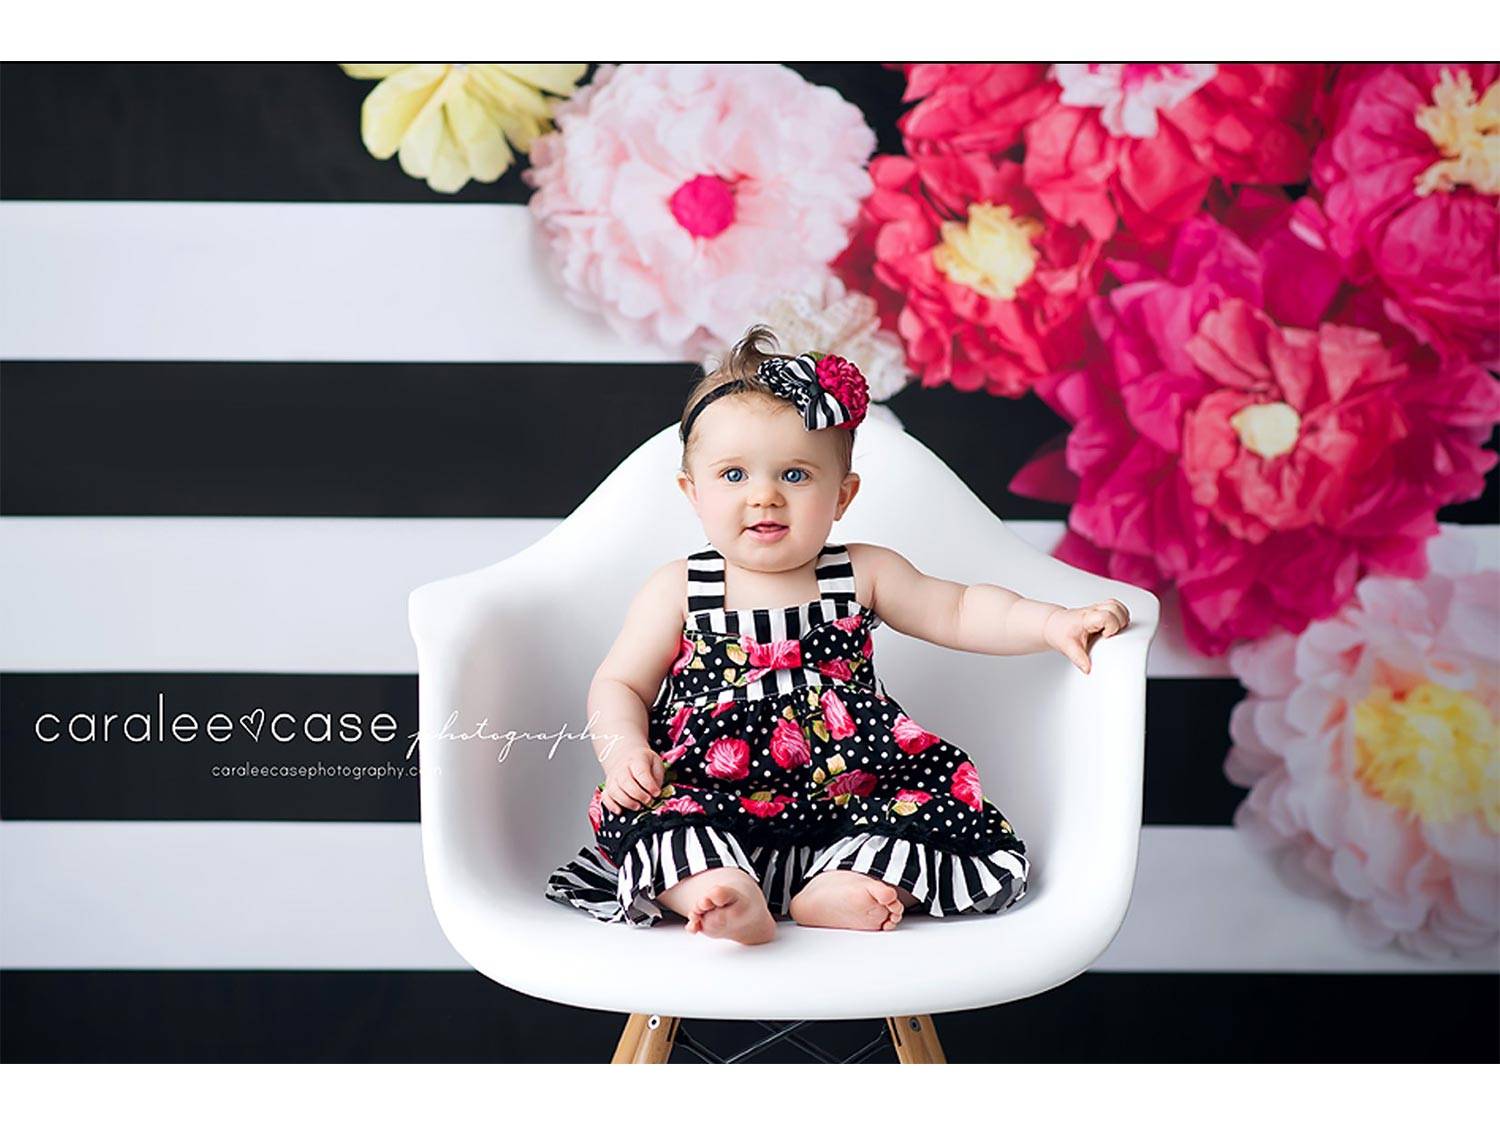 Ciarra - Photography Backdrop by Intuition Backgrounds